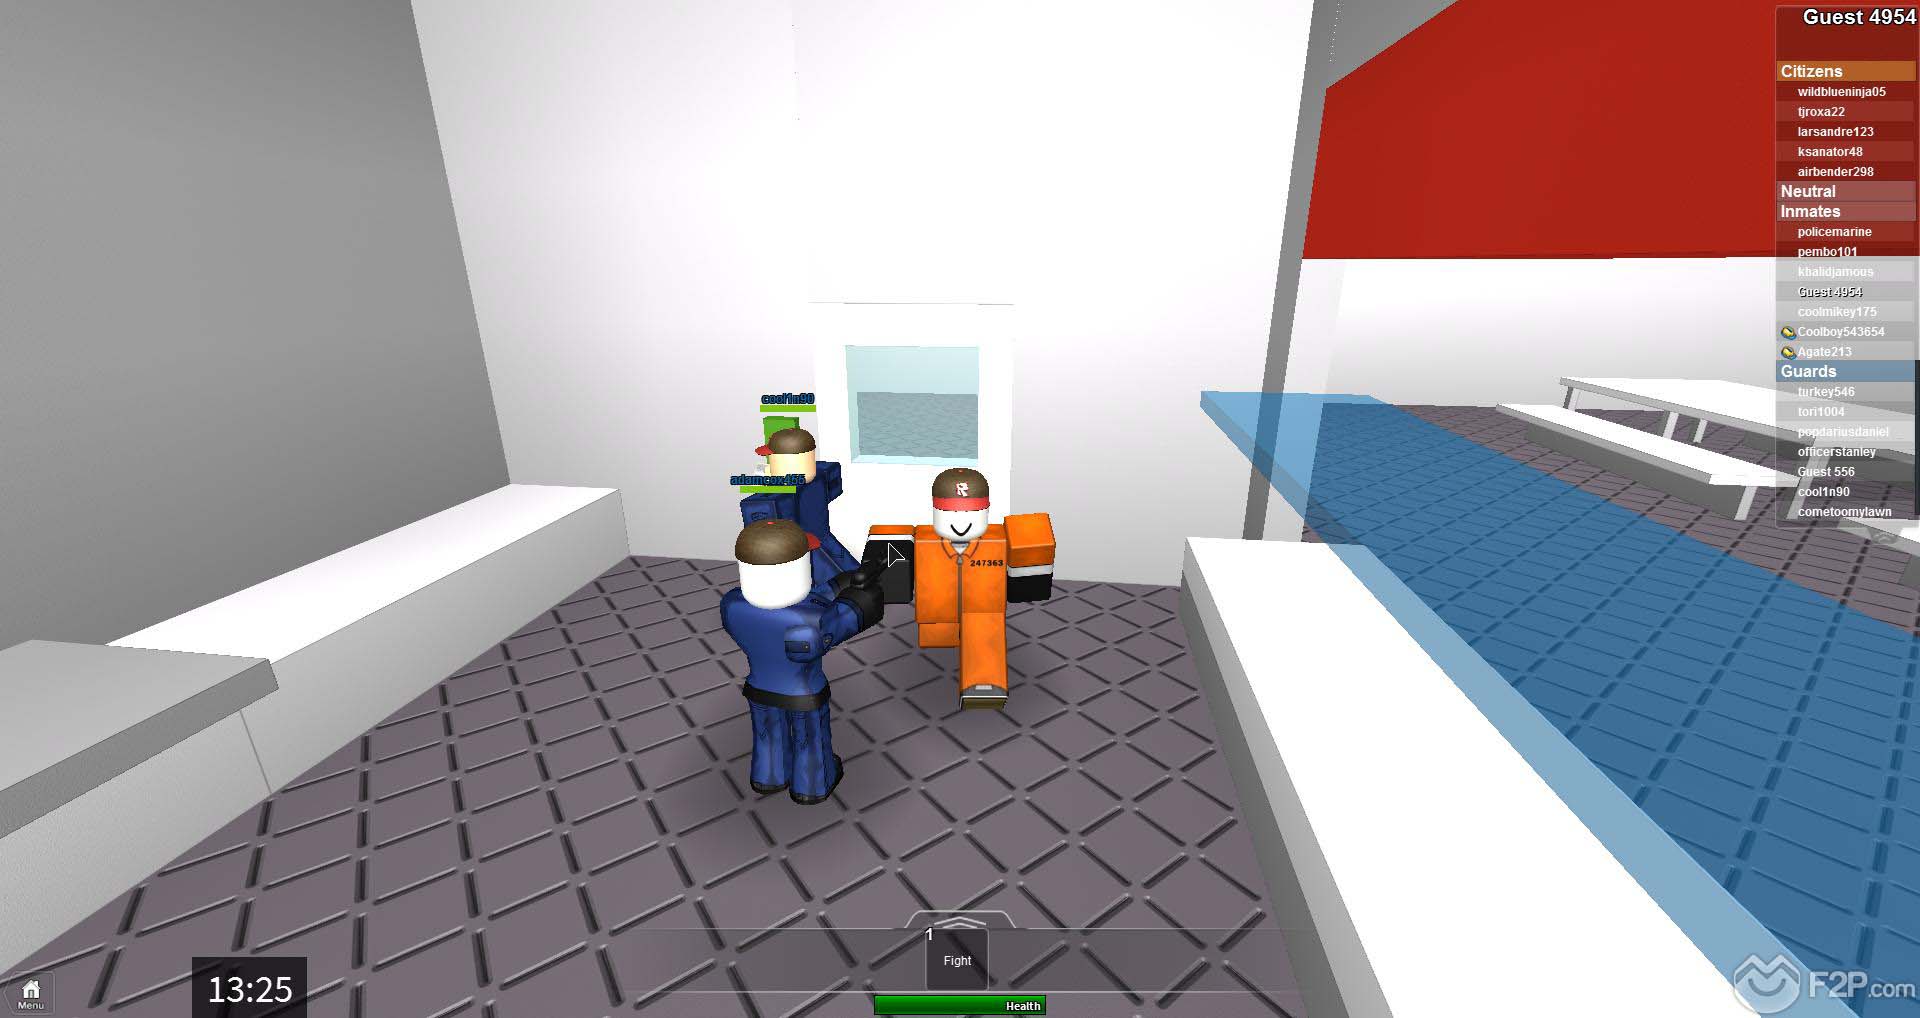 Roblox 2015 Guest